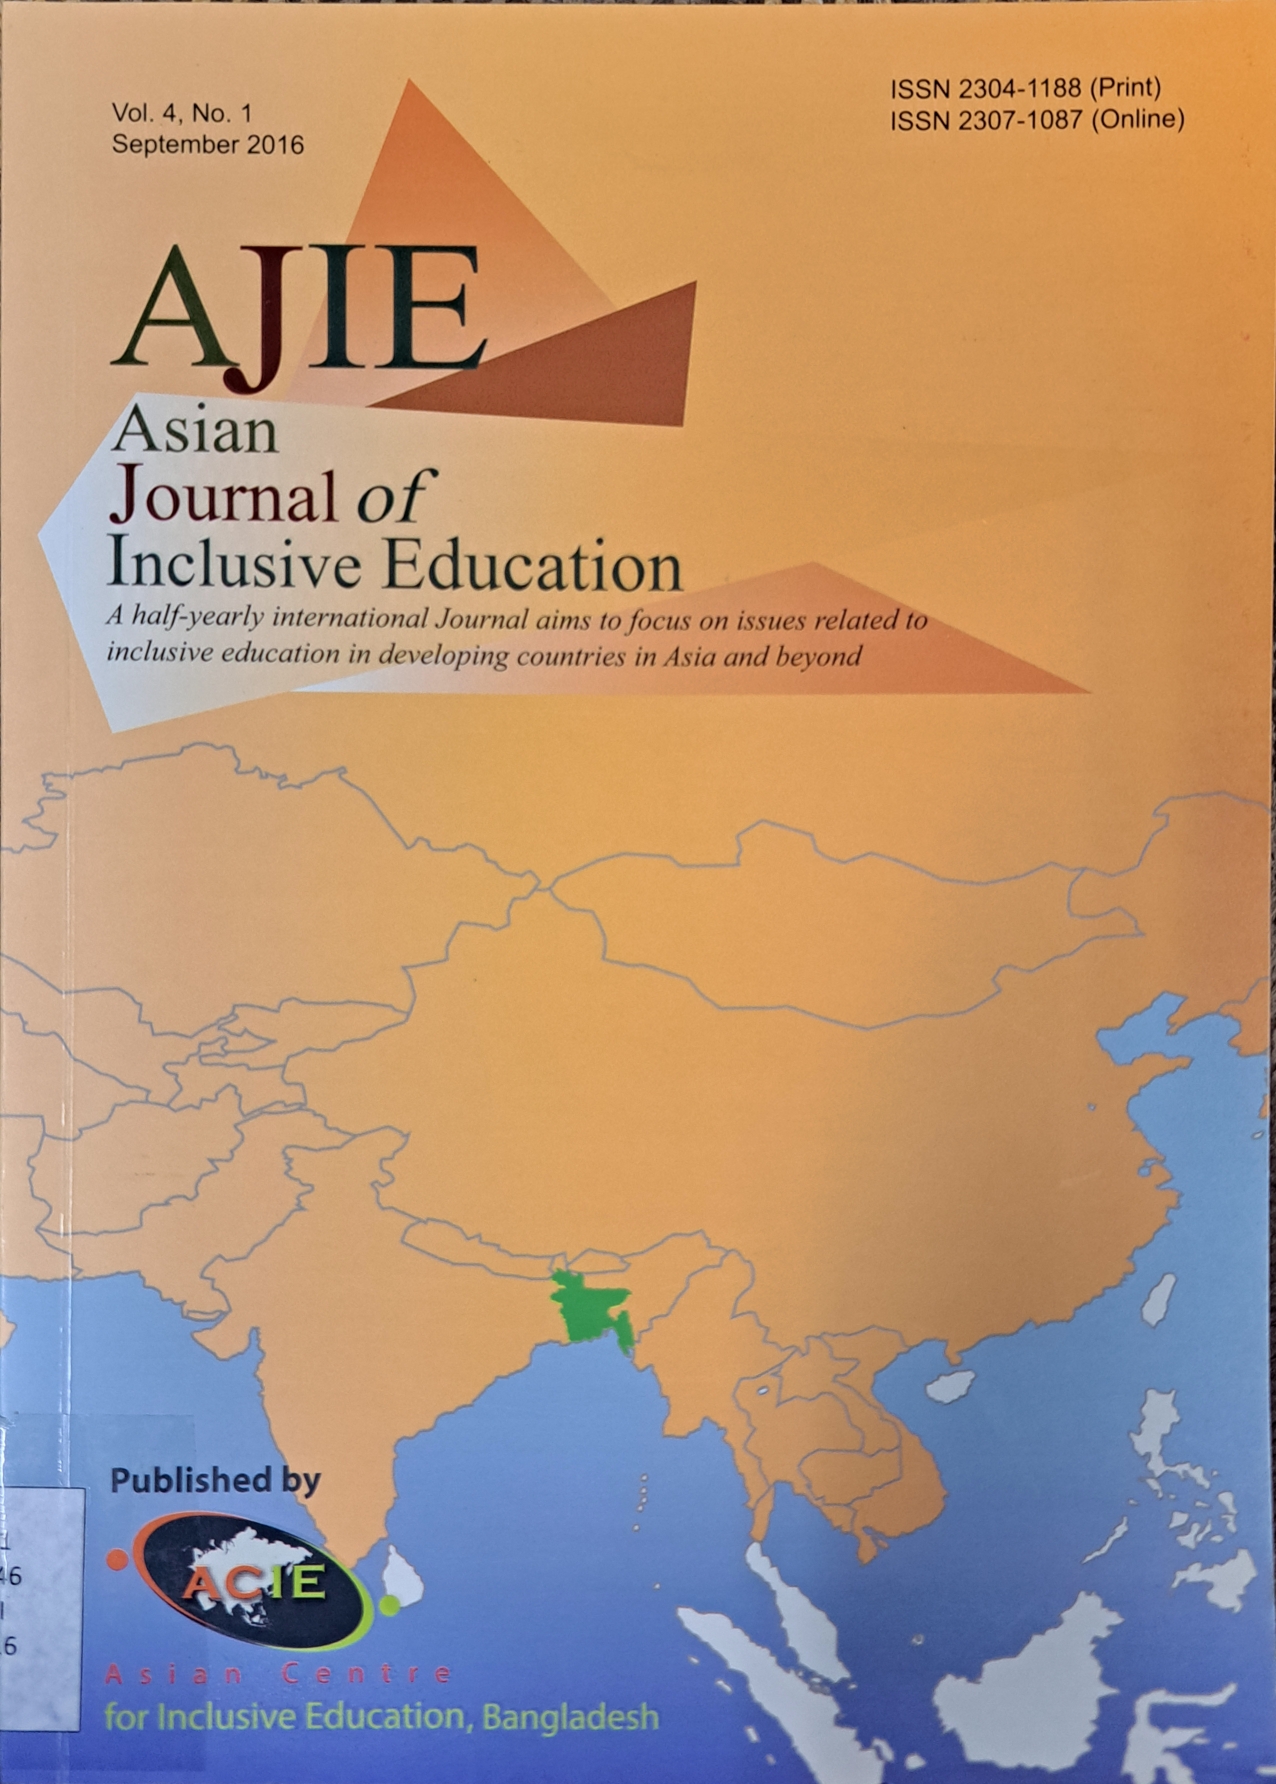 Cover image for Asian journal of inclusive education vol. 4 no 1 / Sep 2016 bibliographic